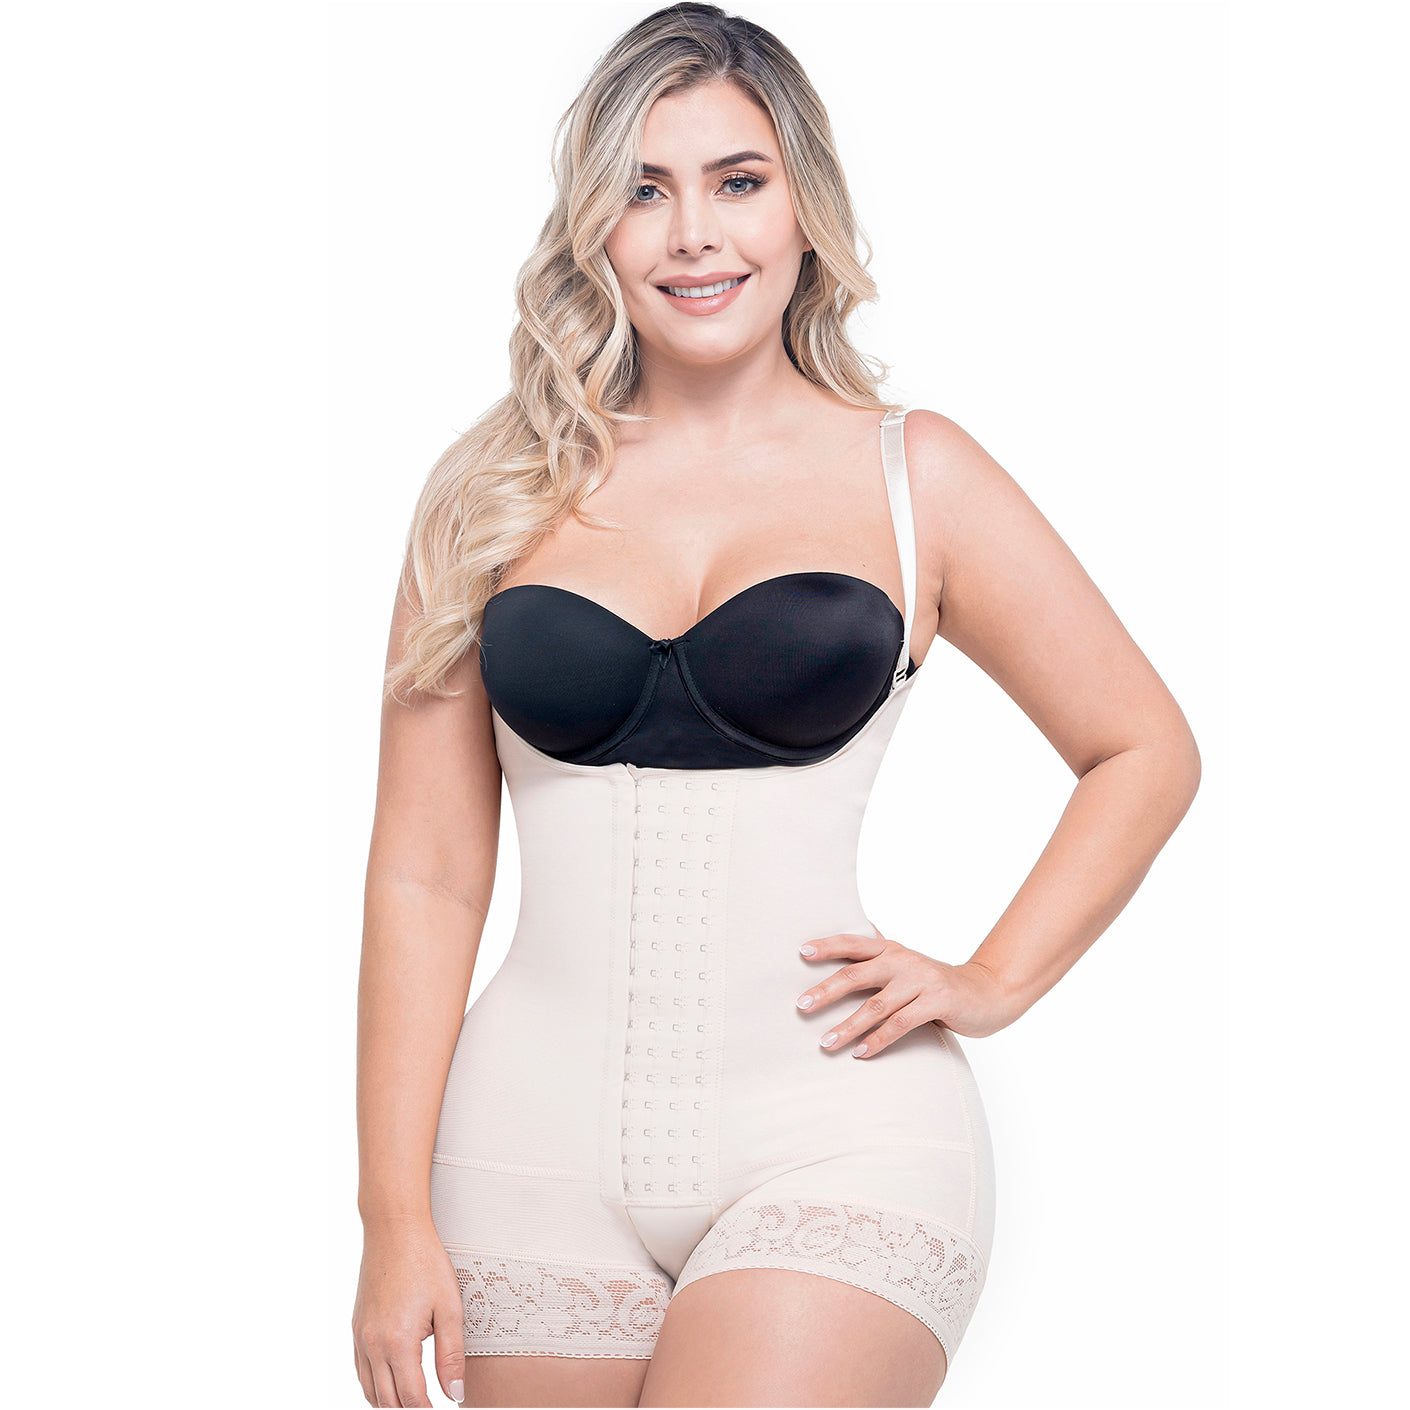 Flat Belly Shaper With Adjustable Waist Trainer Womens Fajas Colombia Double  Compression Body Shape, Zipper & Hook Eyes From Clothingforchoose, $24.87